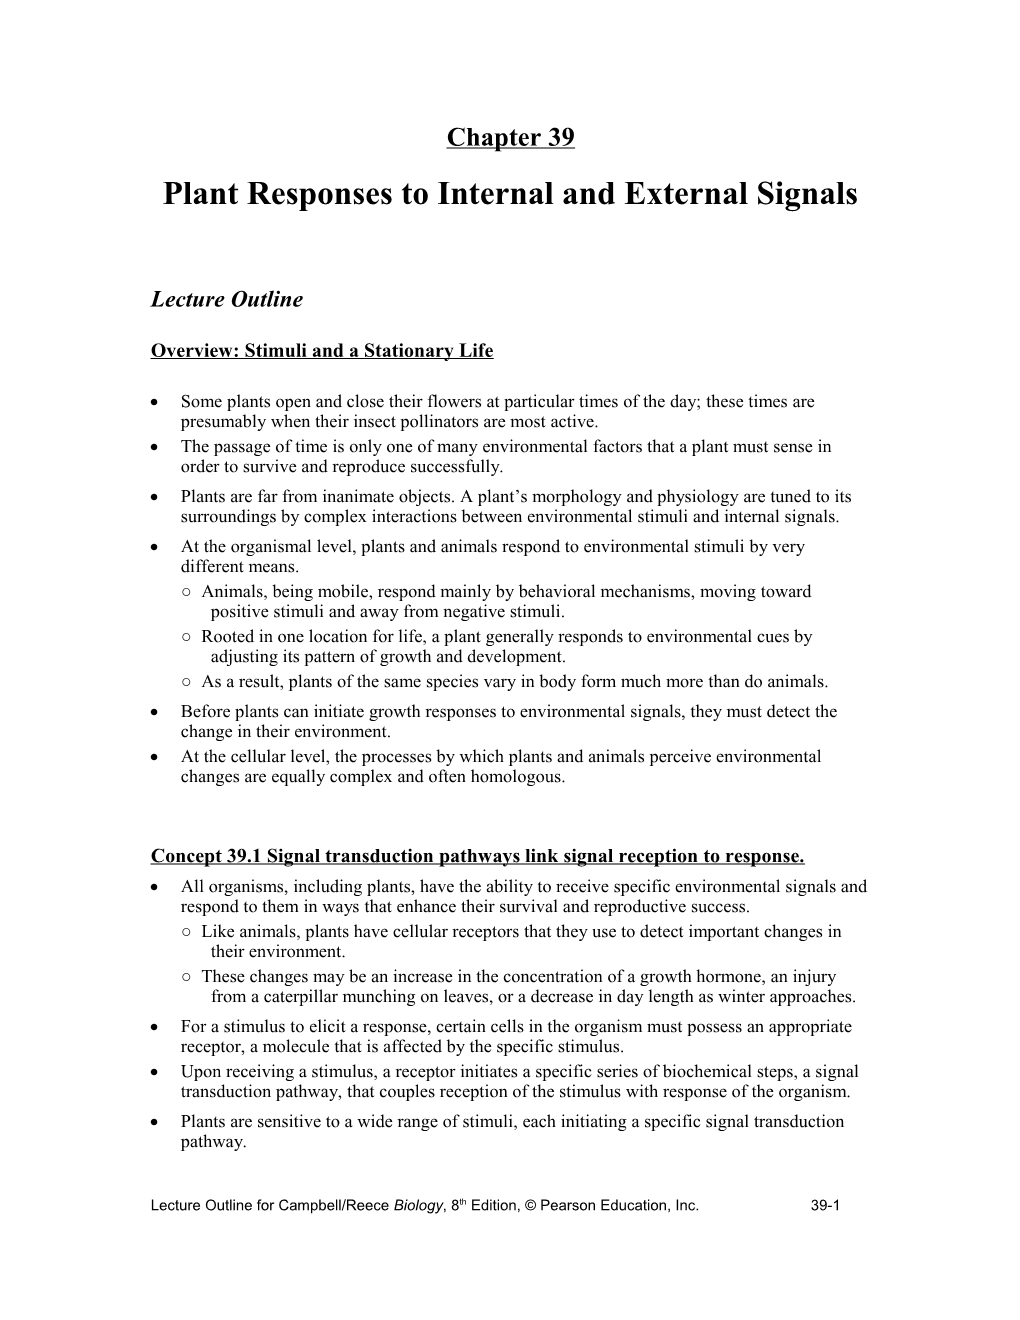 Plant Responses to Internal and External Signals s1